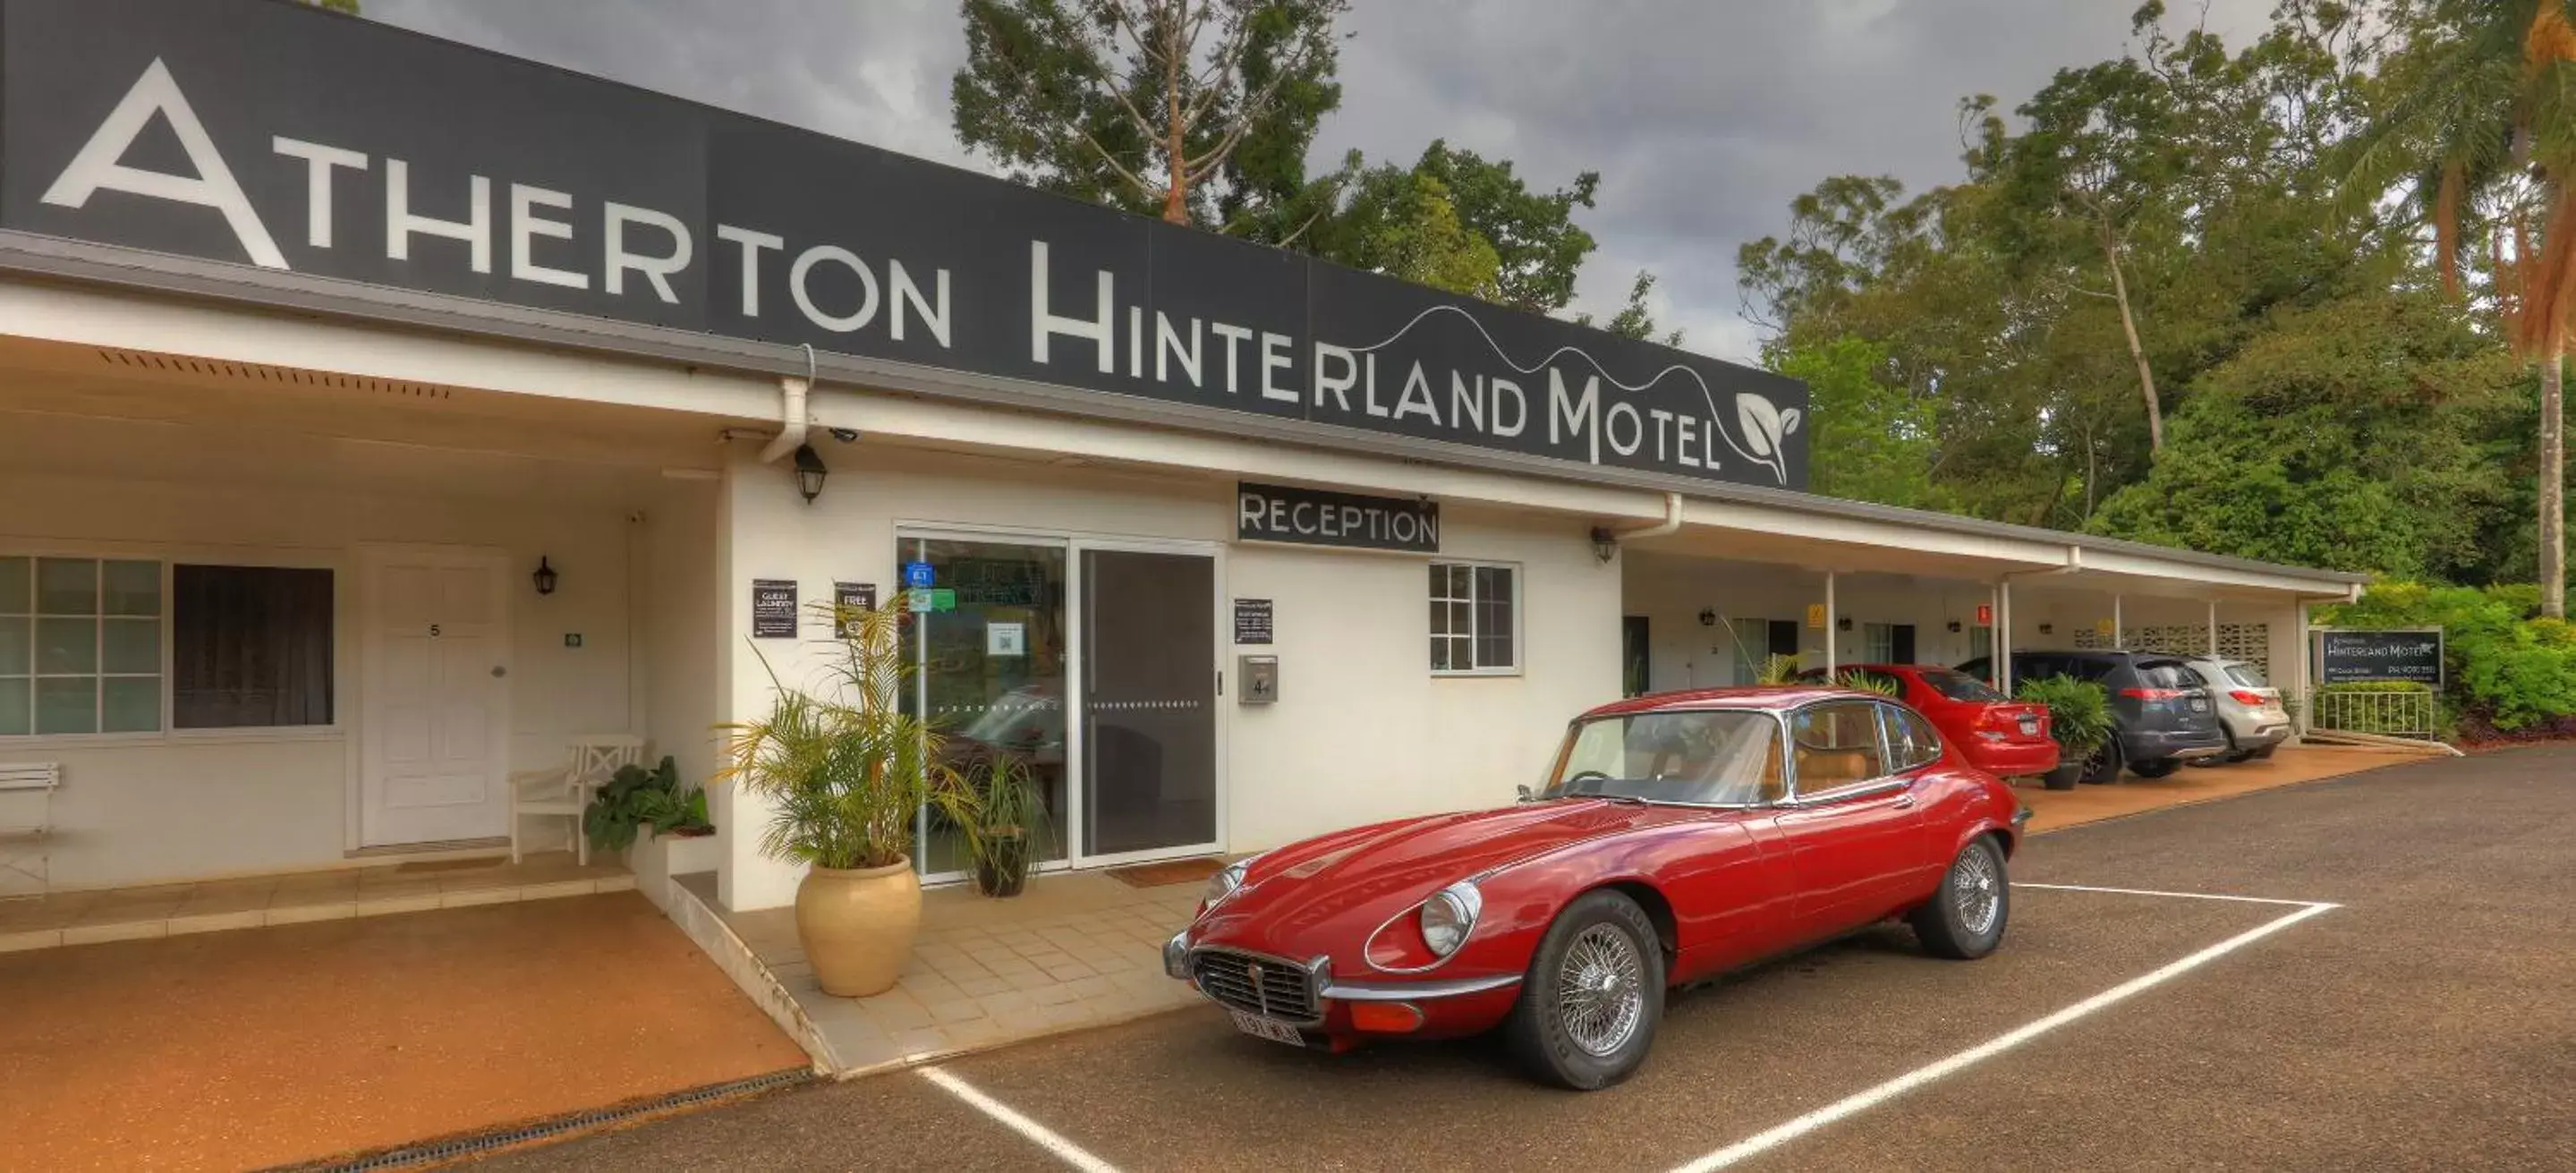 Day, Property Building in Atherton Hinterland Motel